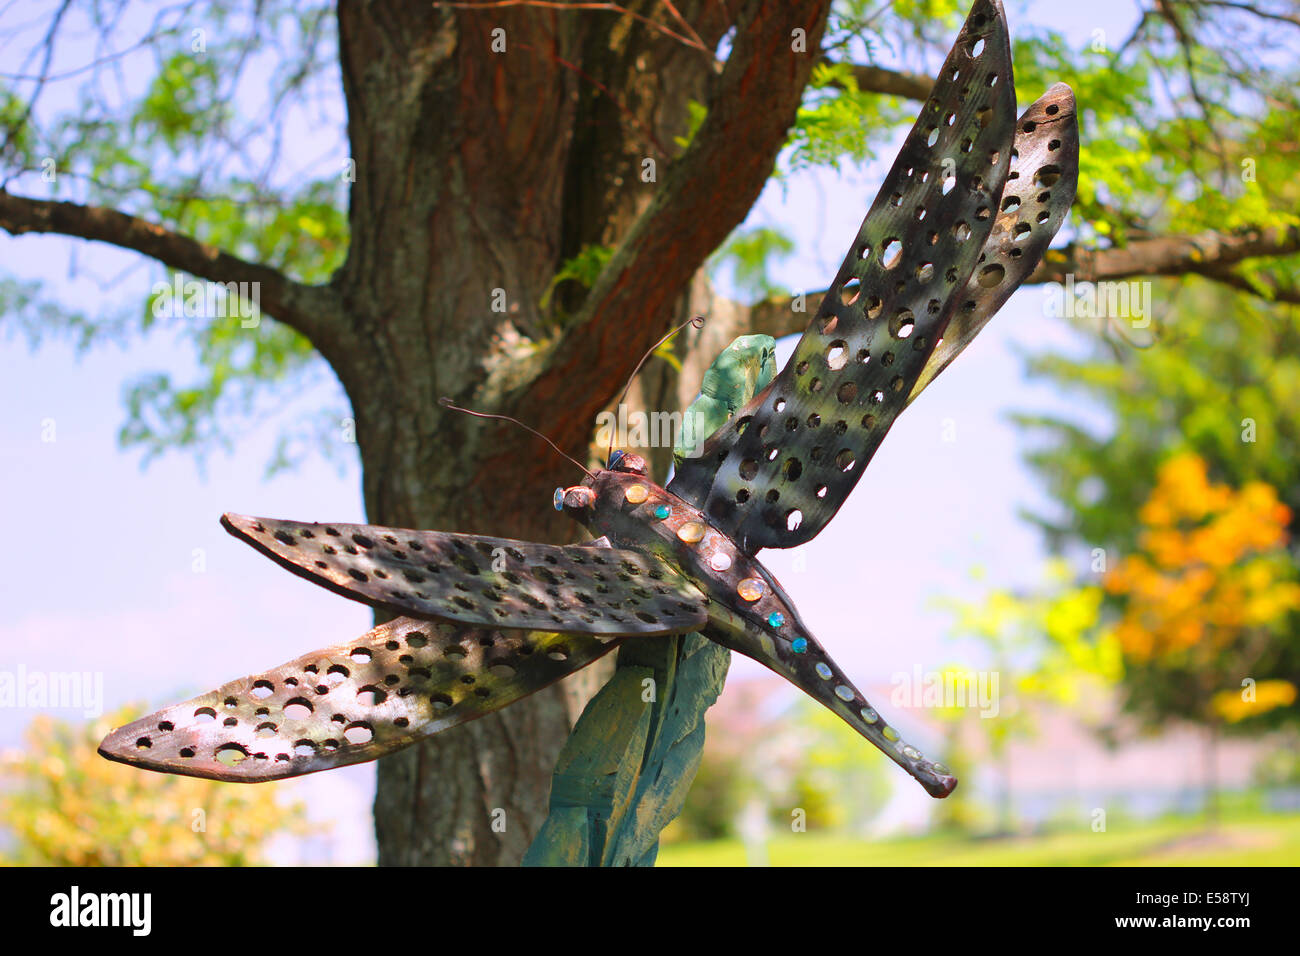 A garden ornament standing by a tree in the shape of a dragonfly insect. Stock Photo